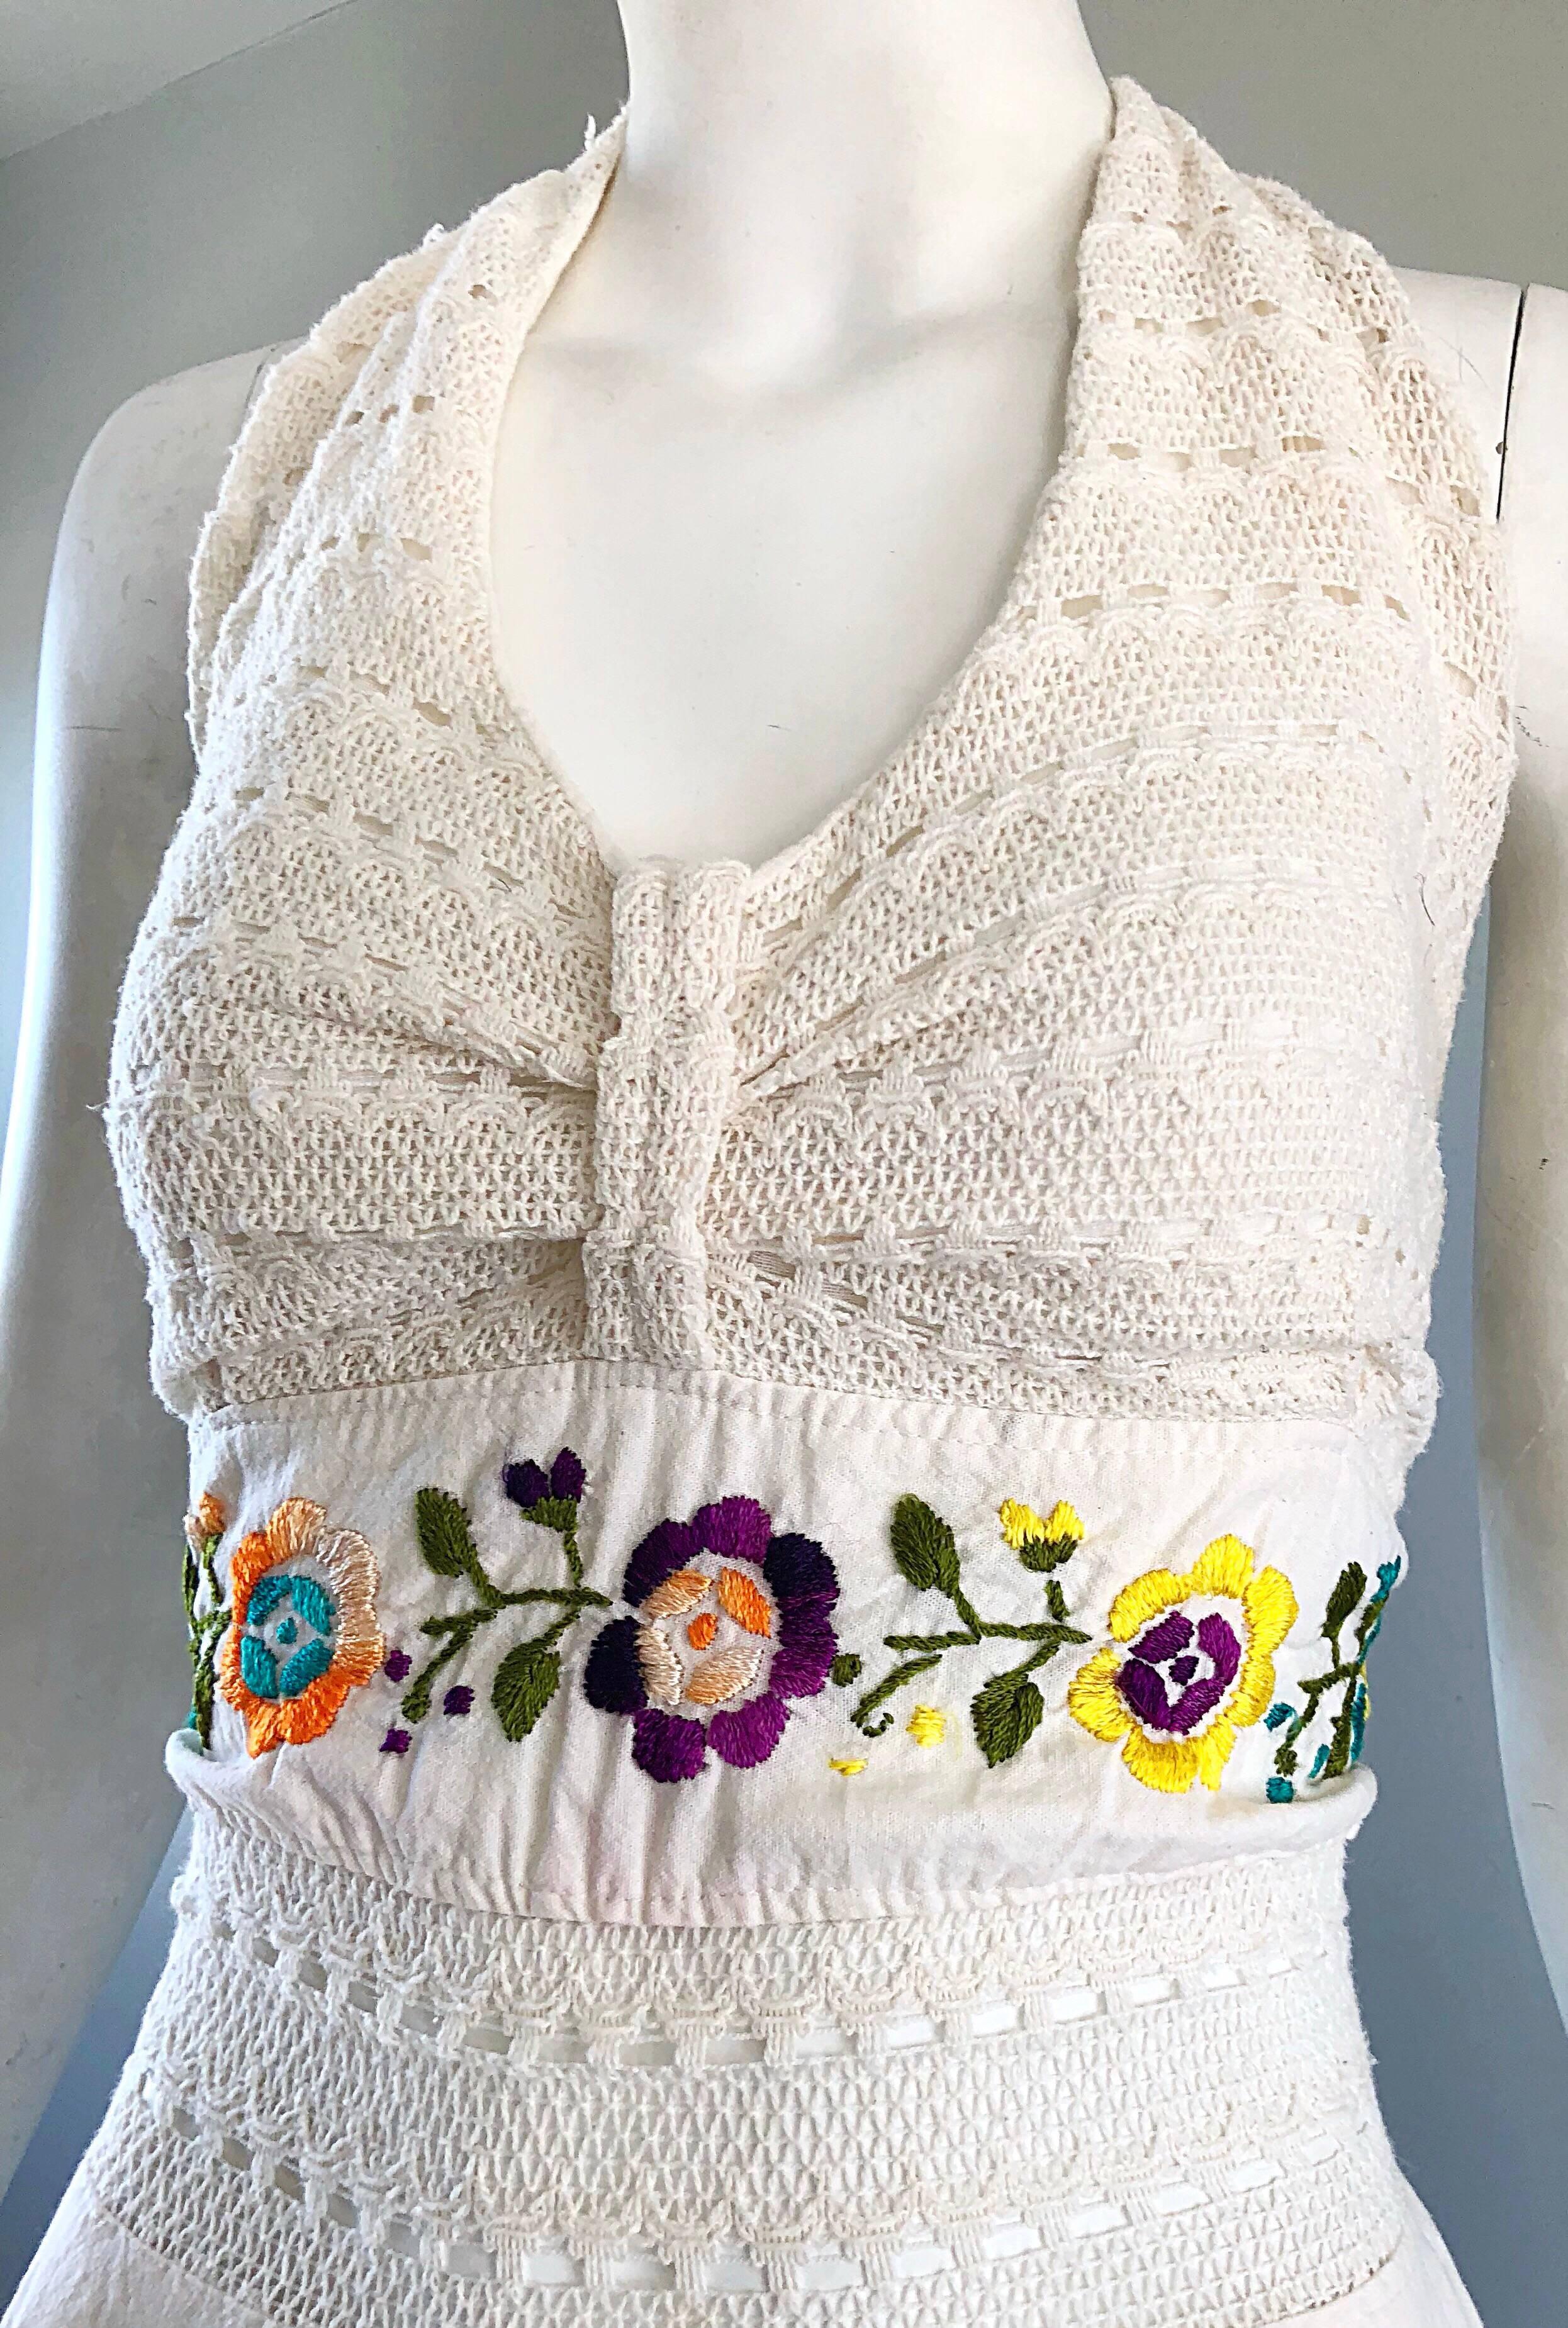 Amazing 1970s ivory / off-white cotton embroidered hanky hem halter dress! Features a crochet bodice with flowers embroidered in purple, blue, yellow, orange, yellow and green. Asymmetrical flirty handkerchief hem looks amazing on! Ties at the top